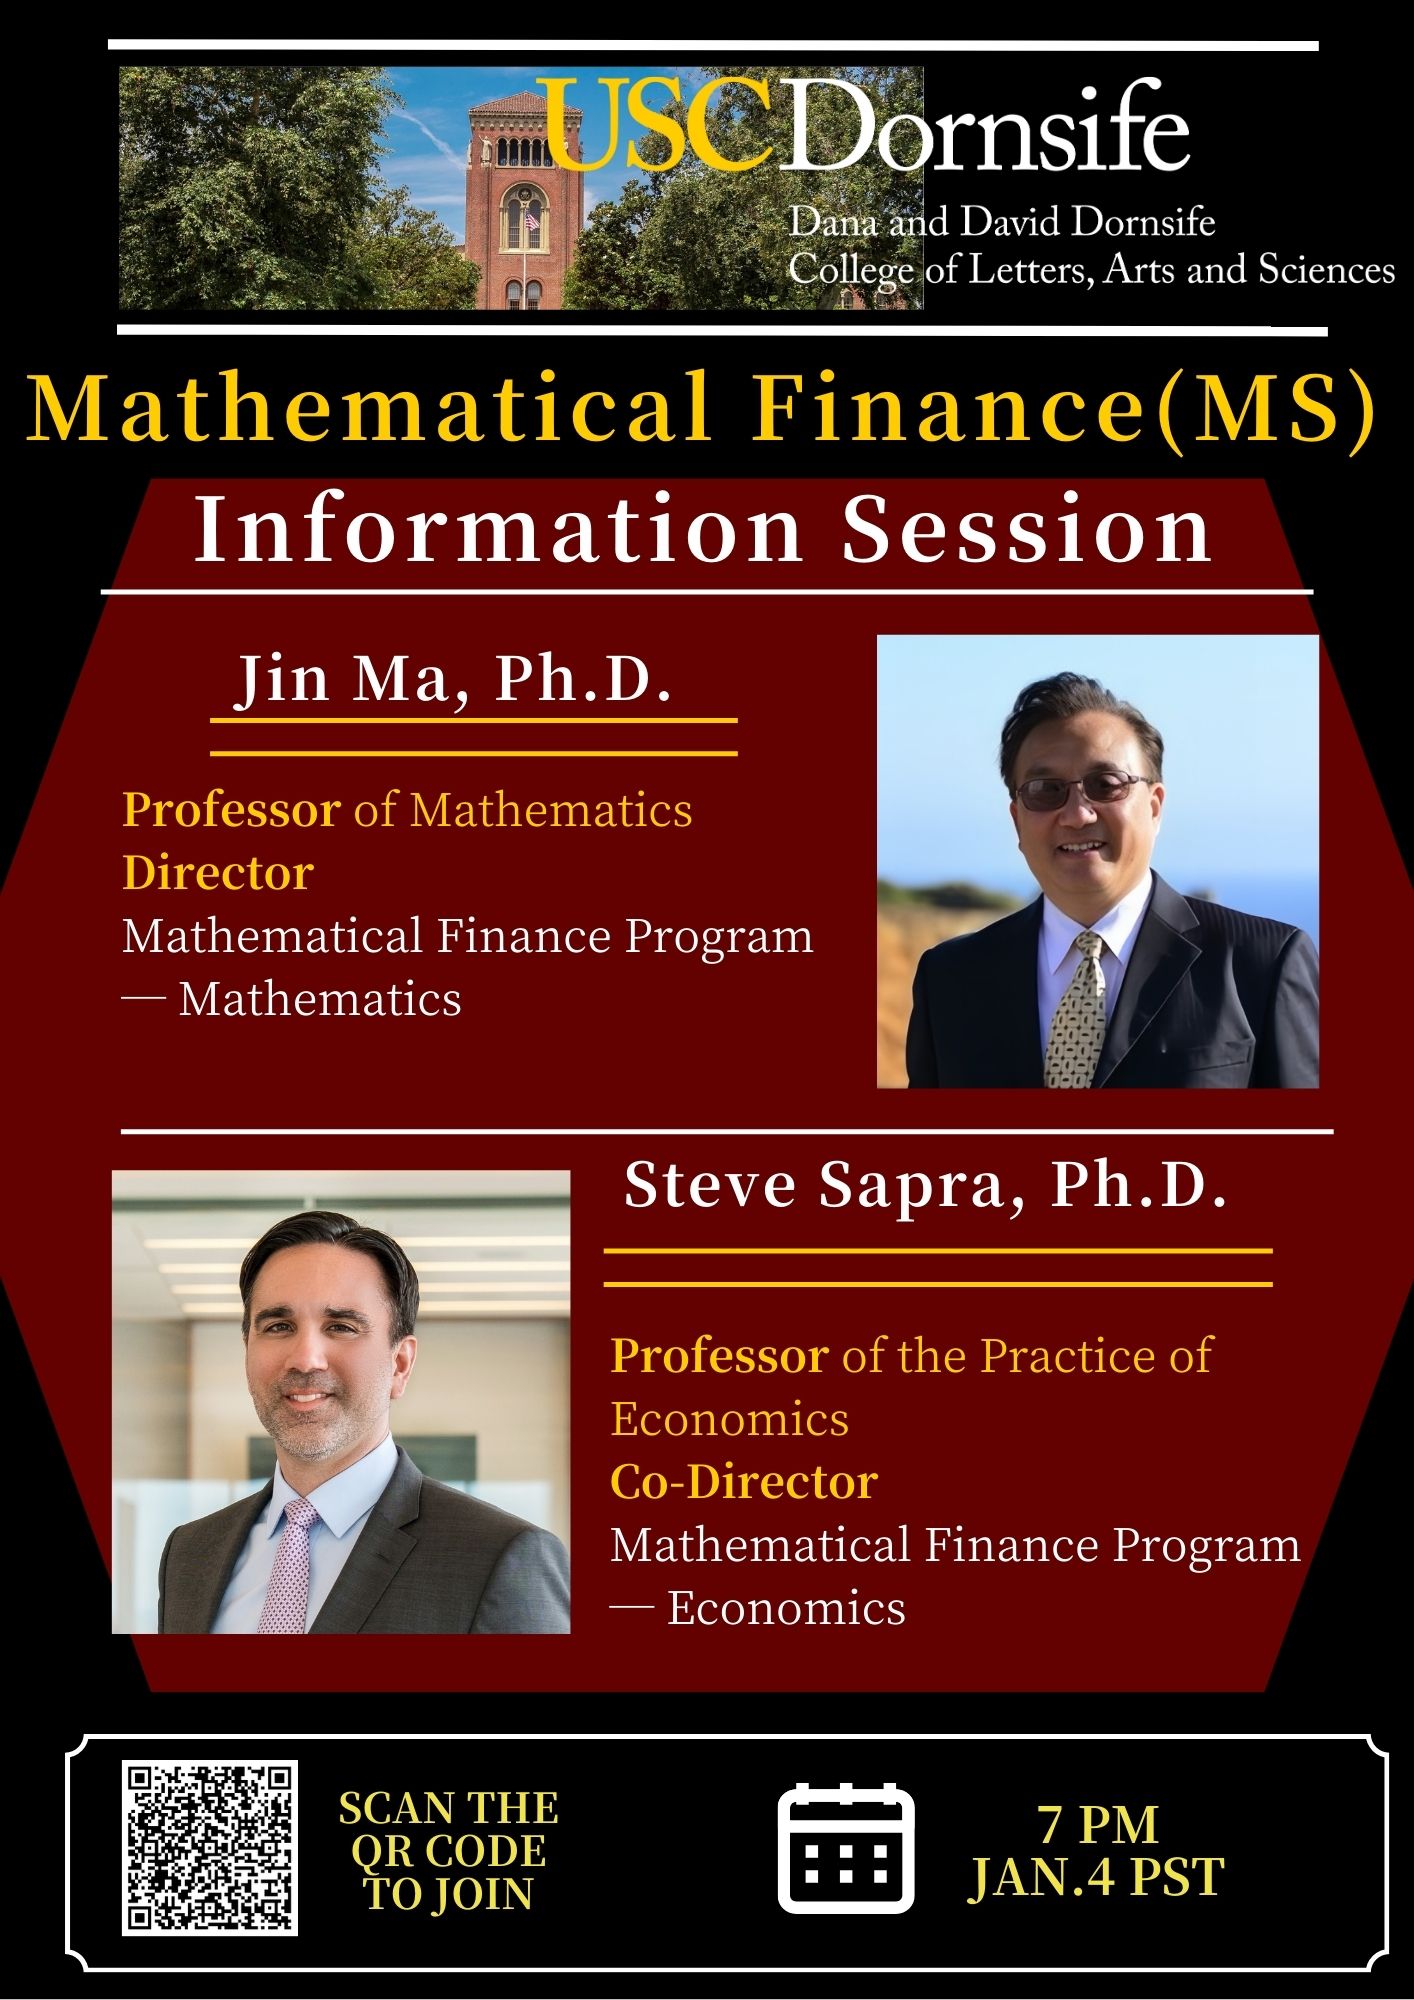 Mathematical Finance(MS) Information Session